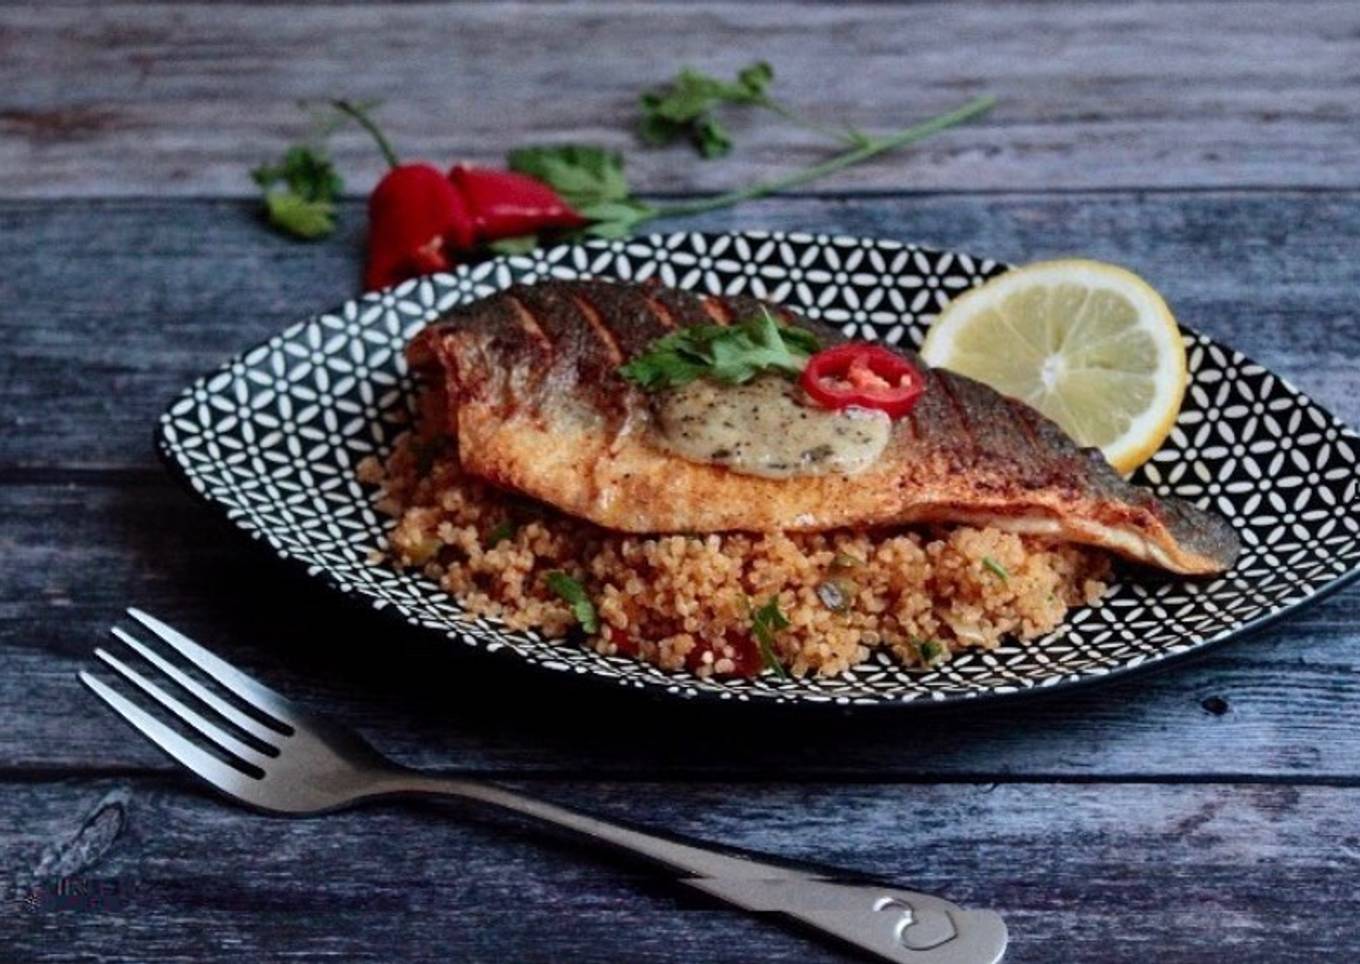 Spiced cous cous with seared seabass